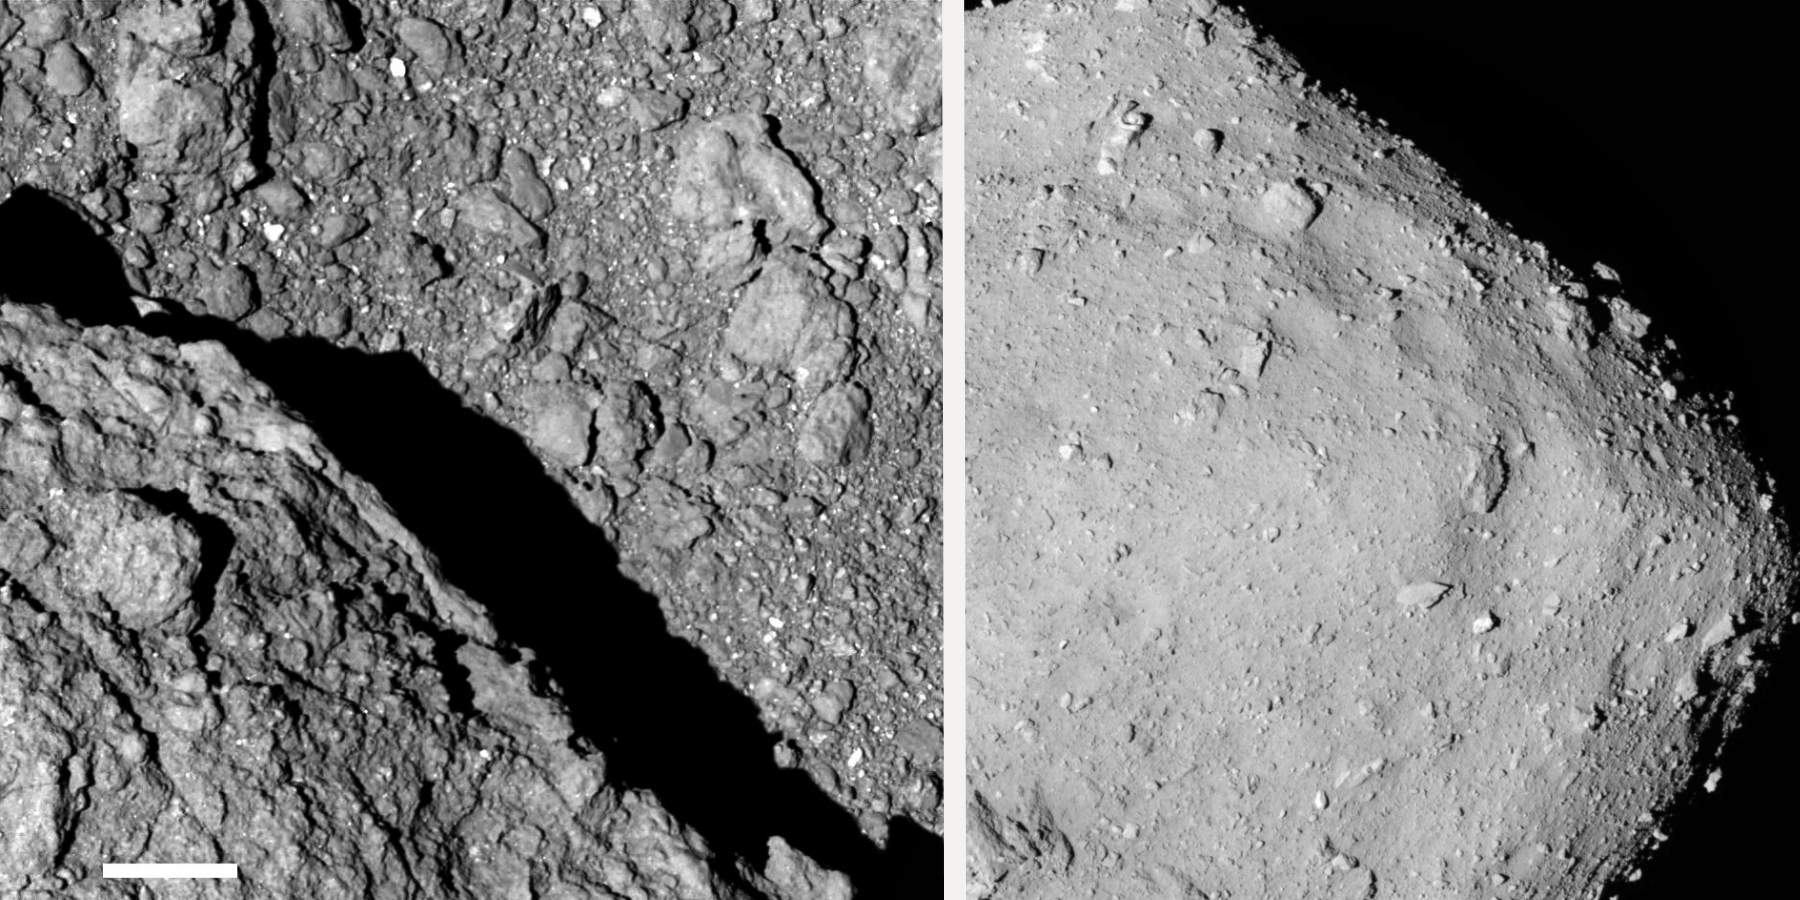 Asteroid Ryugu Surface features reveal 20 amino acids and building blocks of life. Image Credit: JAXA.